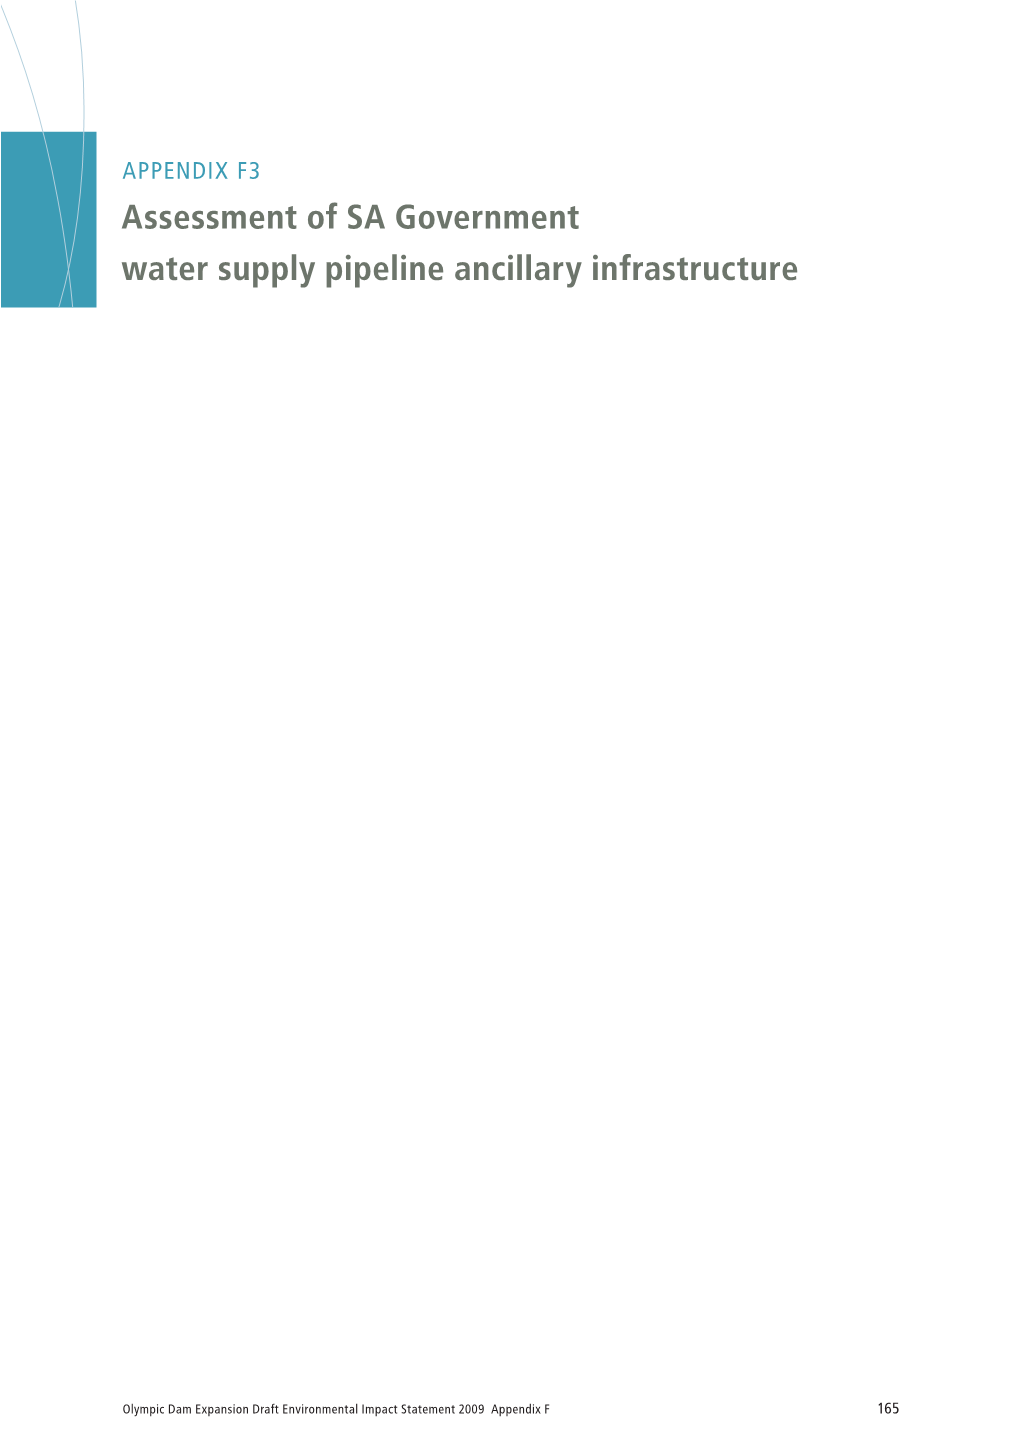 APPENDIX F3 Assessment of SA Government Water Supply Pipeline Ancillary Infrastructure